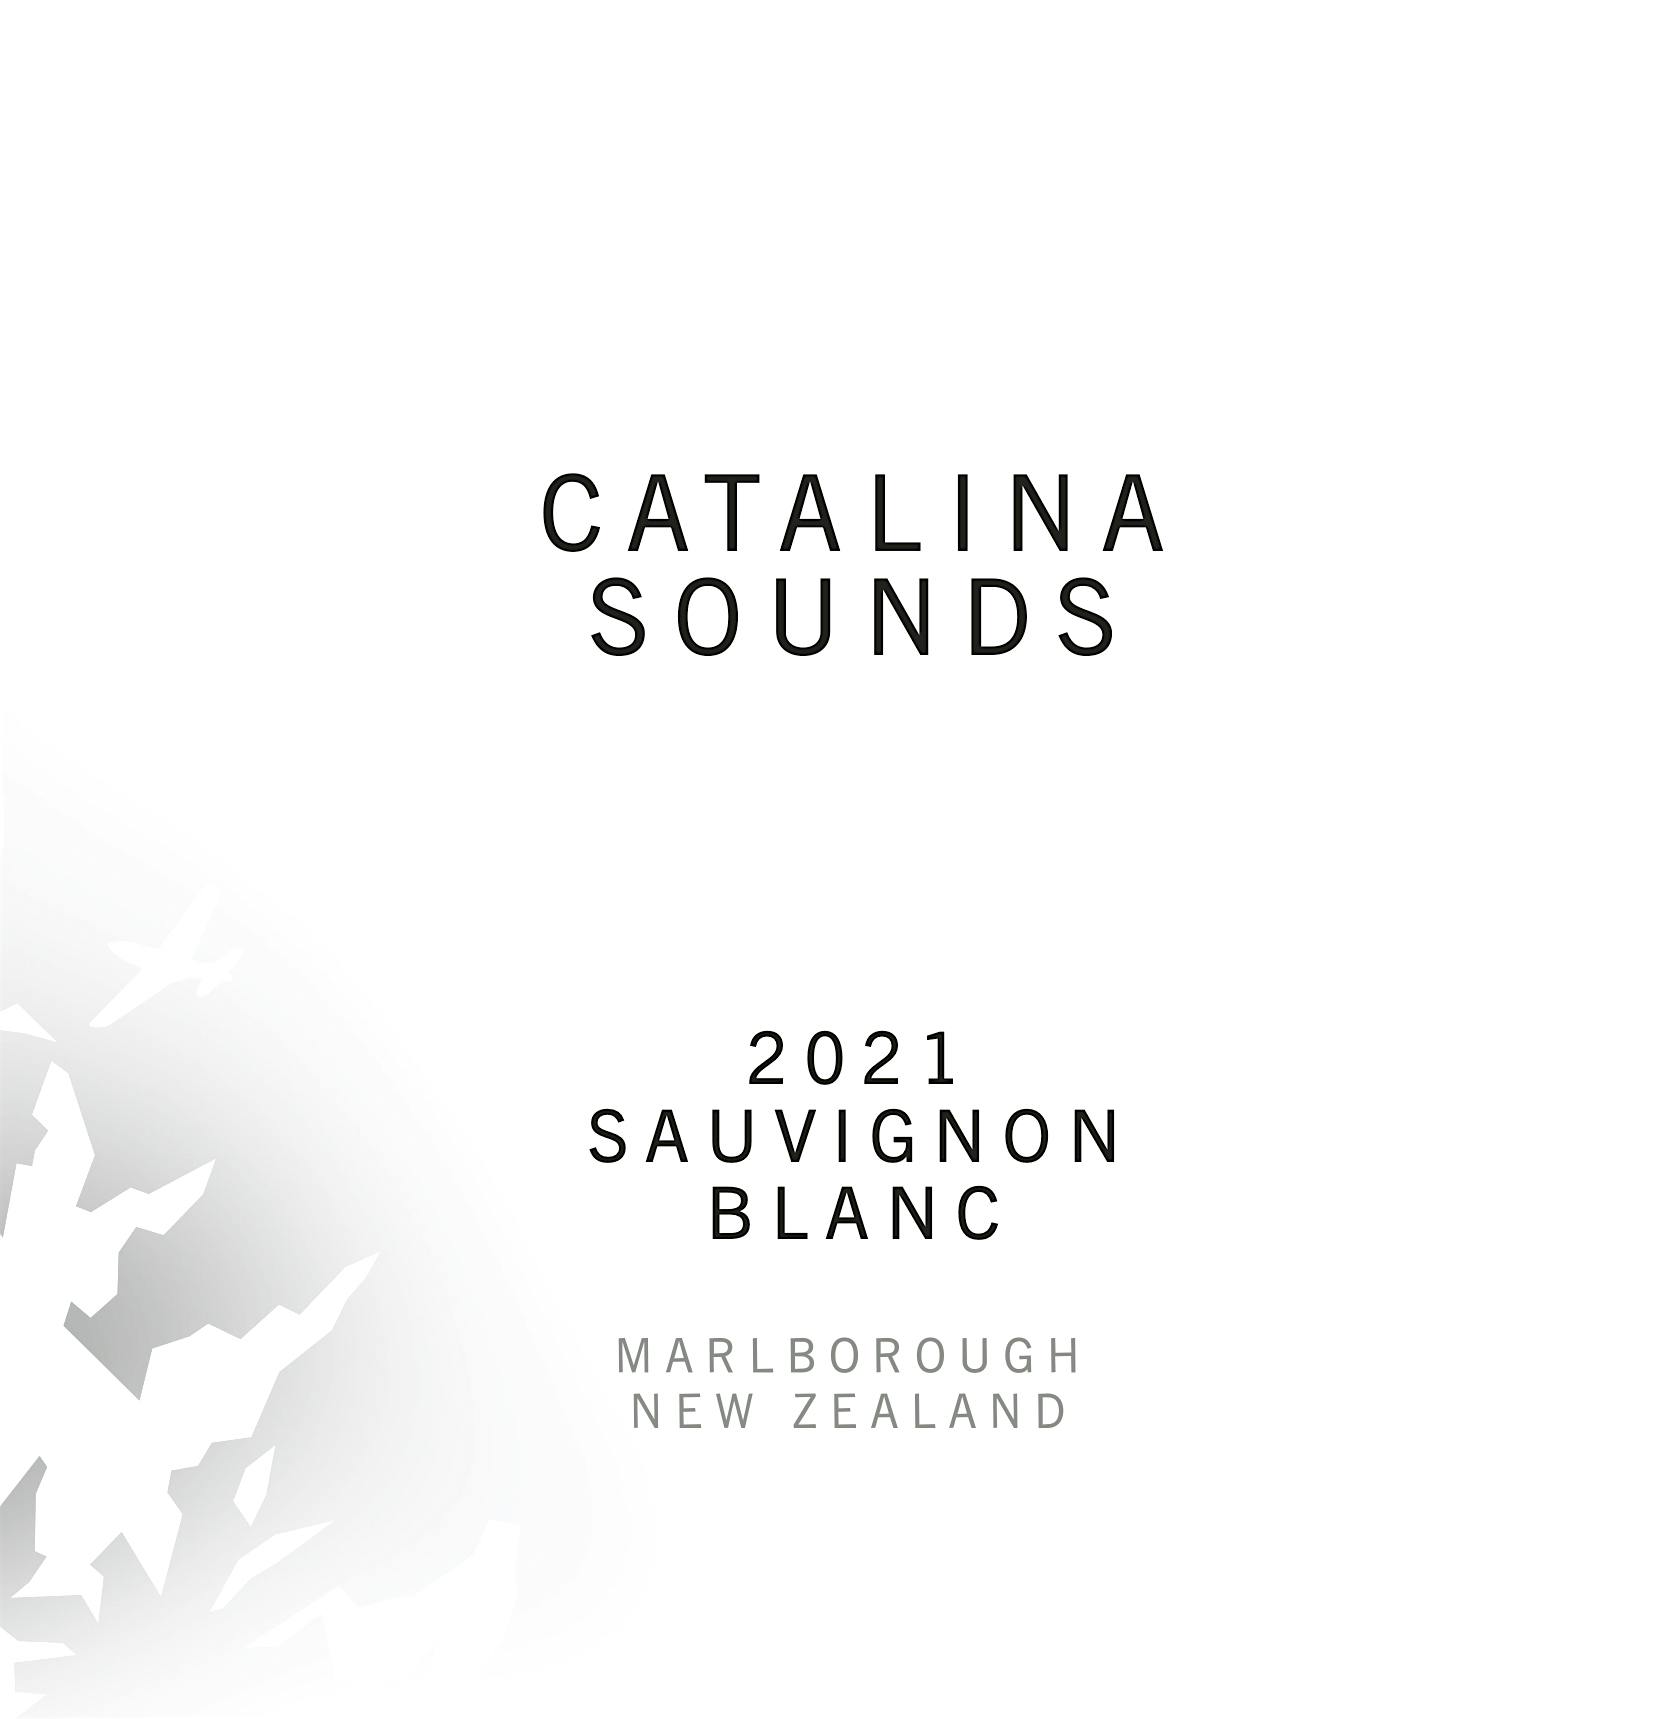 Label for Catalina Sounds